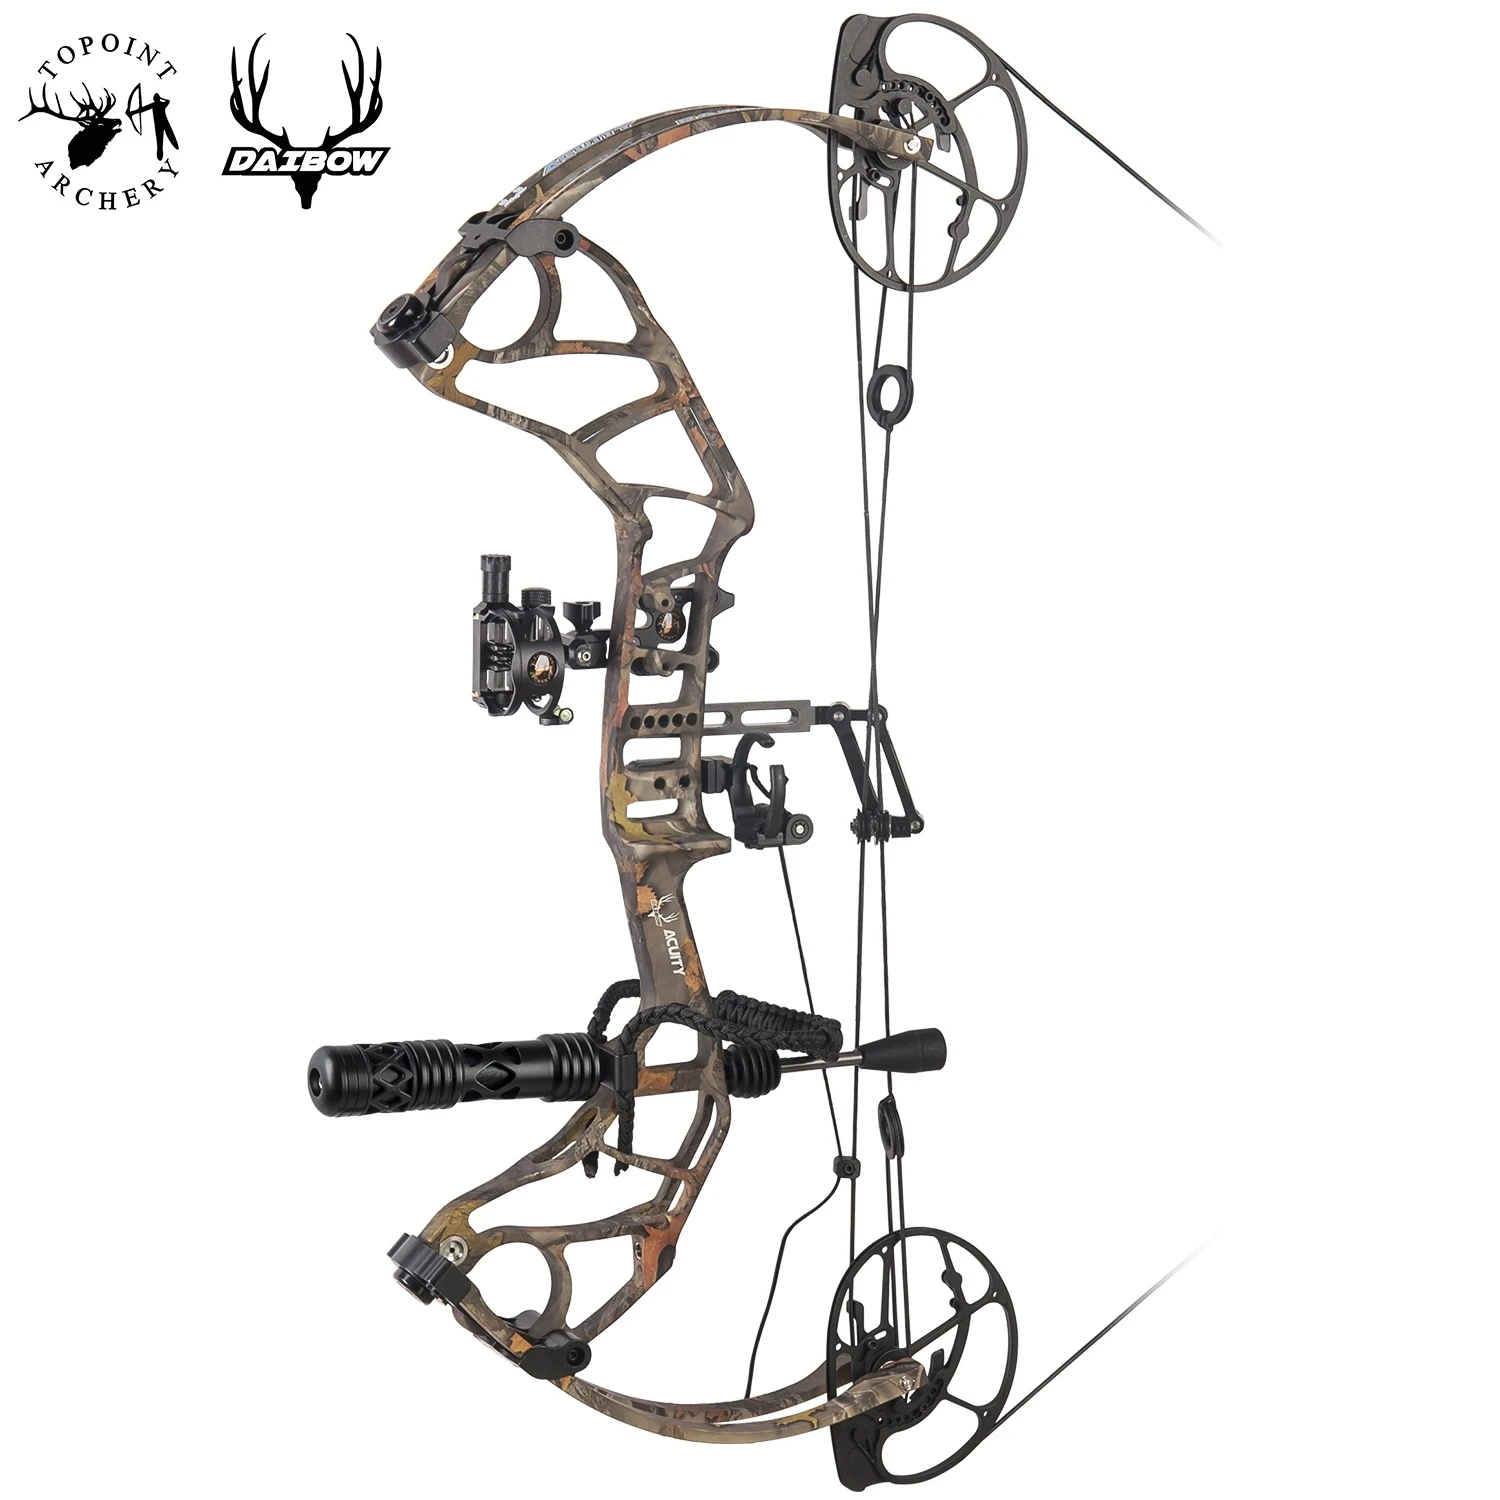 

Topoint Archery Daibow Vigor High Speed Hunting Compound Bow Package USA Gordon Composites Limb BCY String